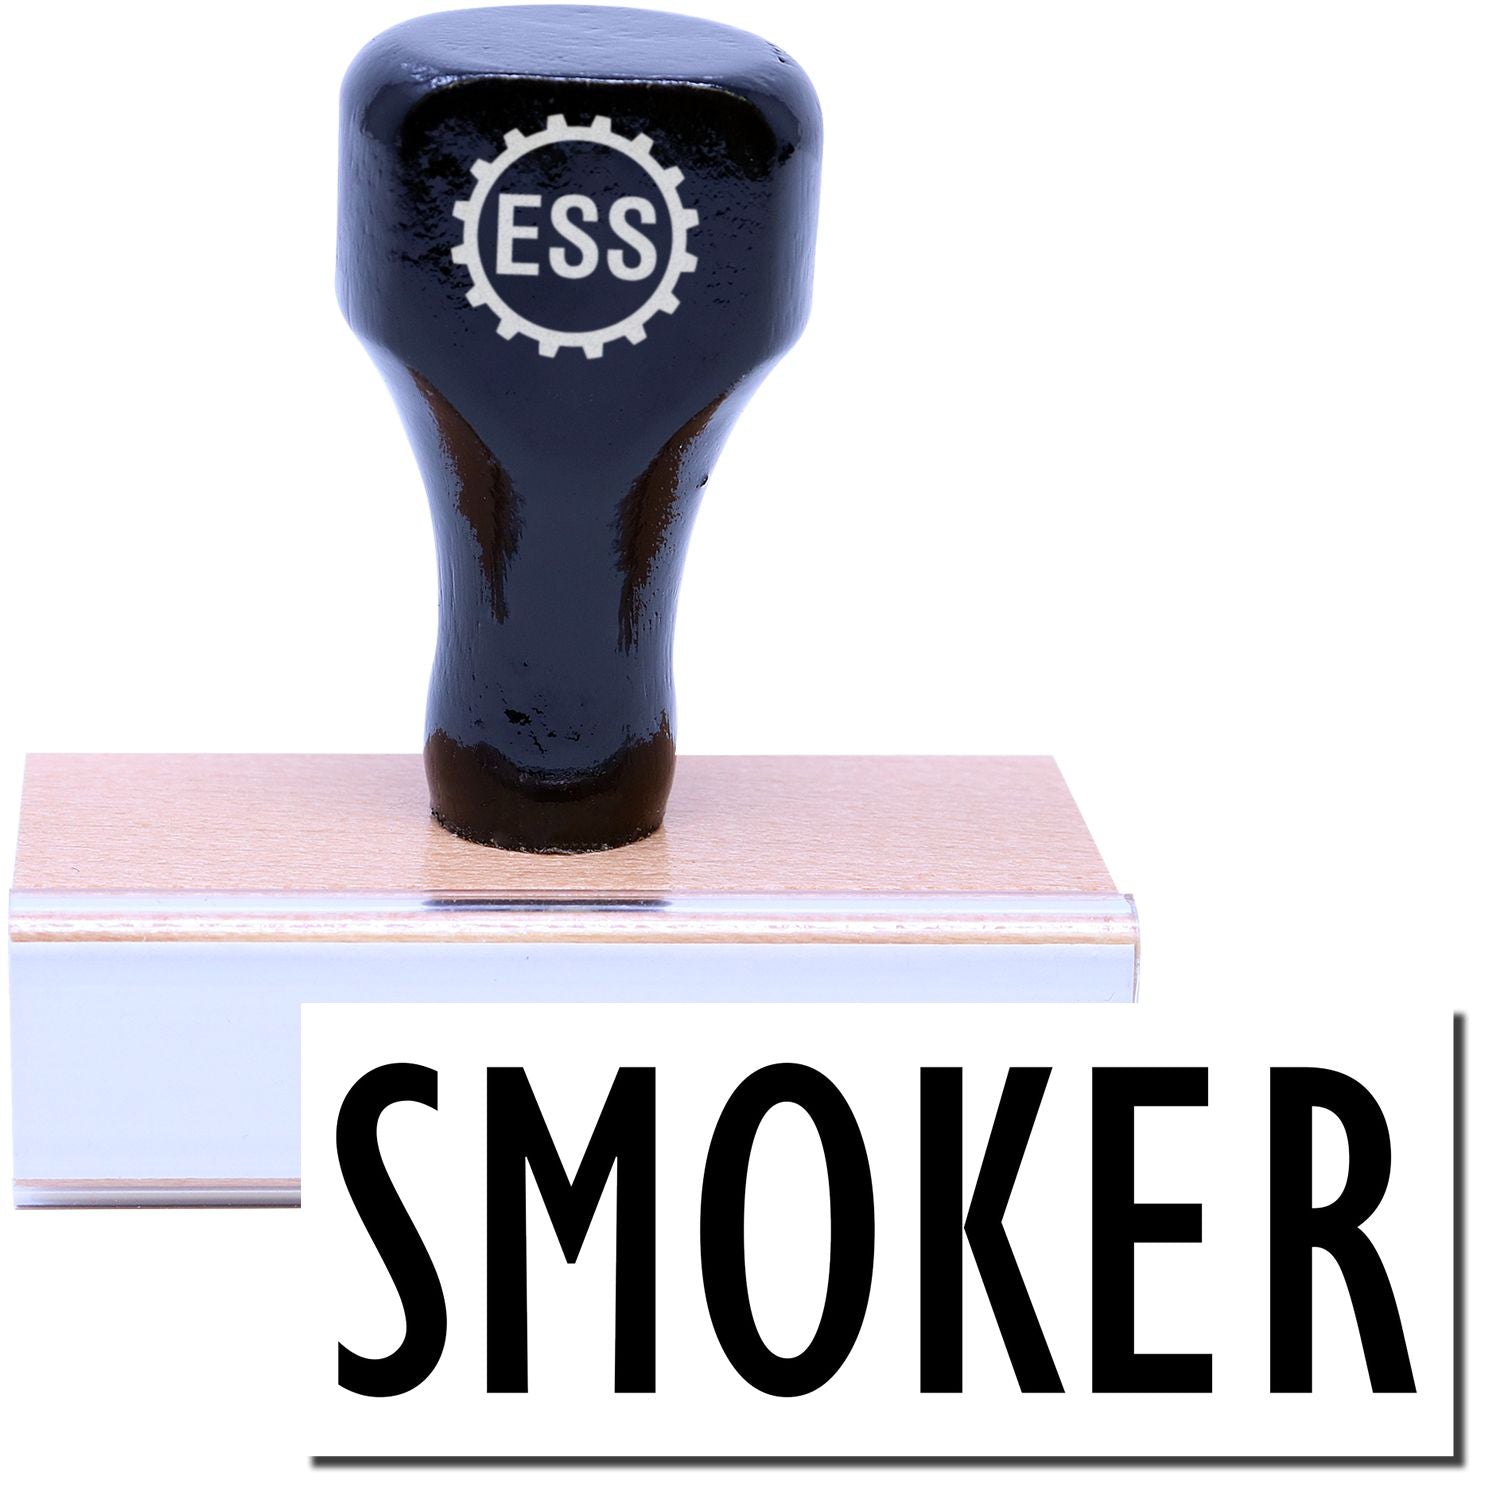 A stock office rubber stamp with a stamped image showing how the text "SMOKER" in a large font is displayed after stamping.